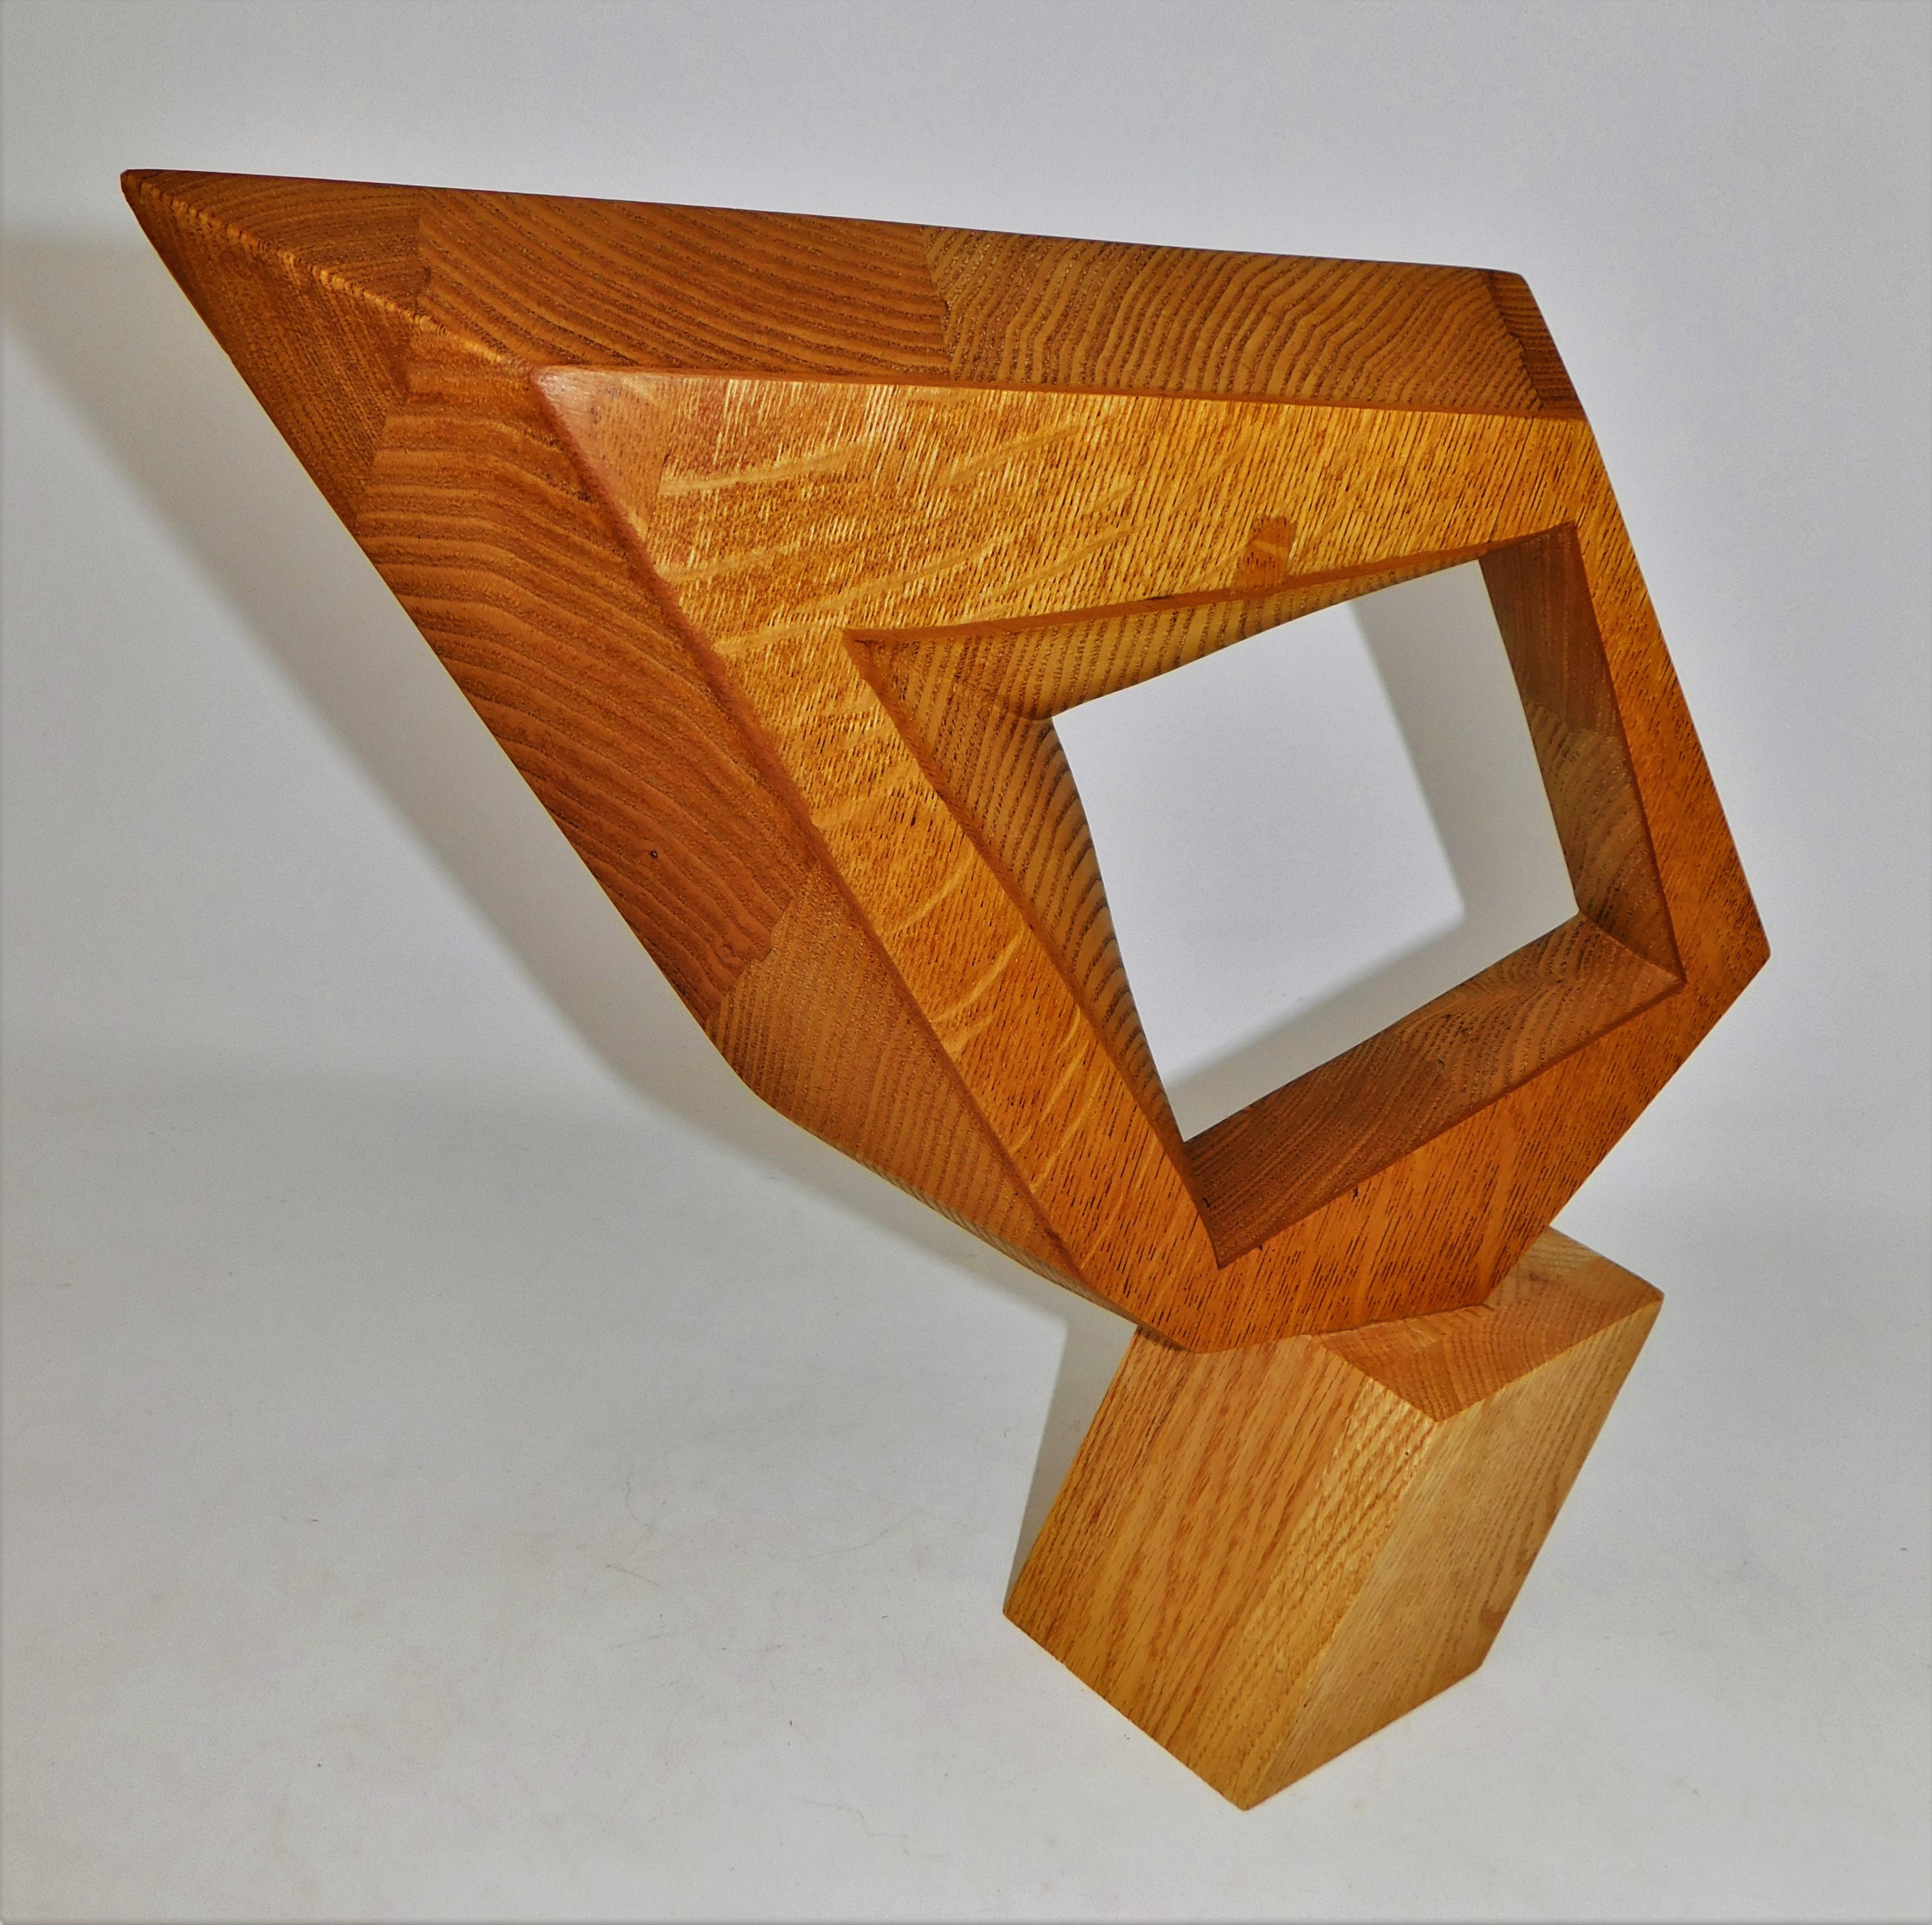 This contemporary abstract wooden sculpture was done by Czeslaw Budny a Polish-Canadian artist in the constructivist style circa 2023. This sculpture was made entirely of up-cycled, reclaimed wood from a variety of sources and utilizes the